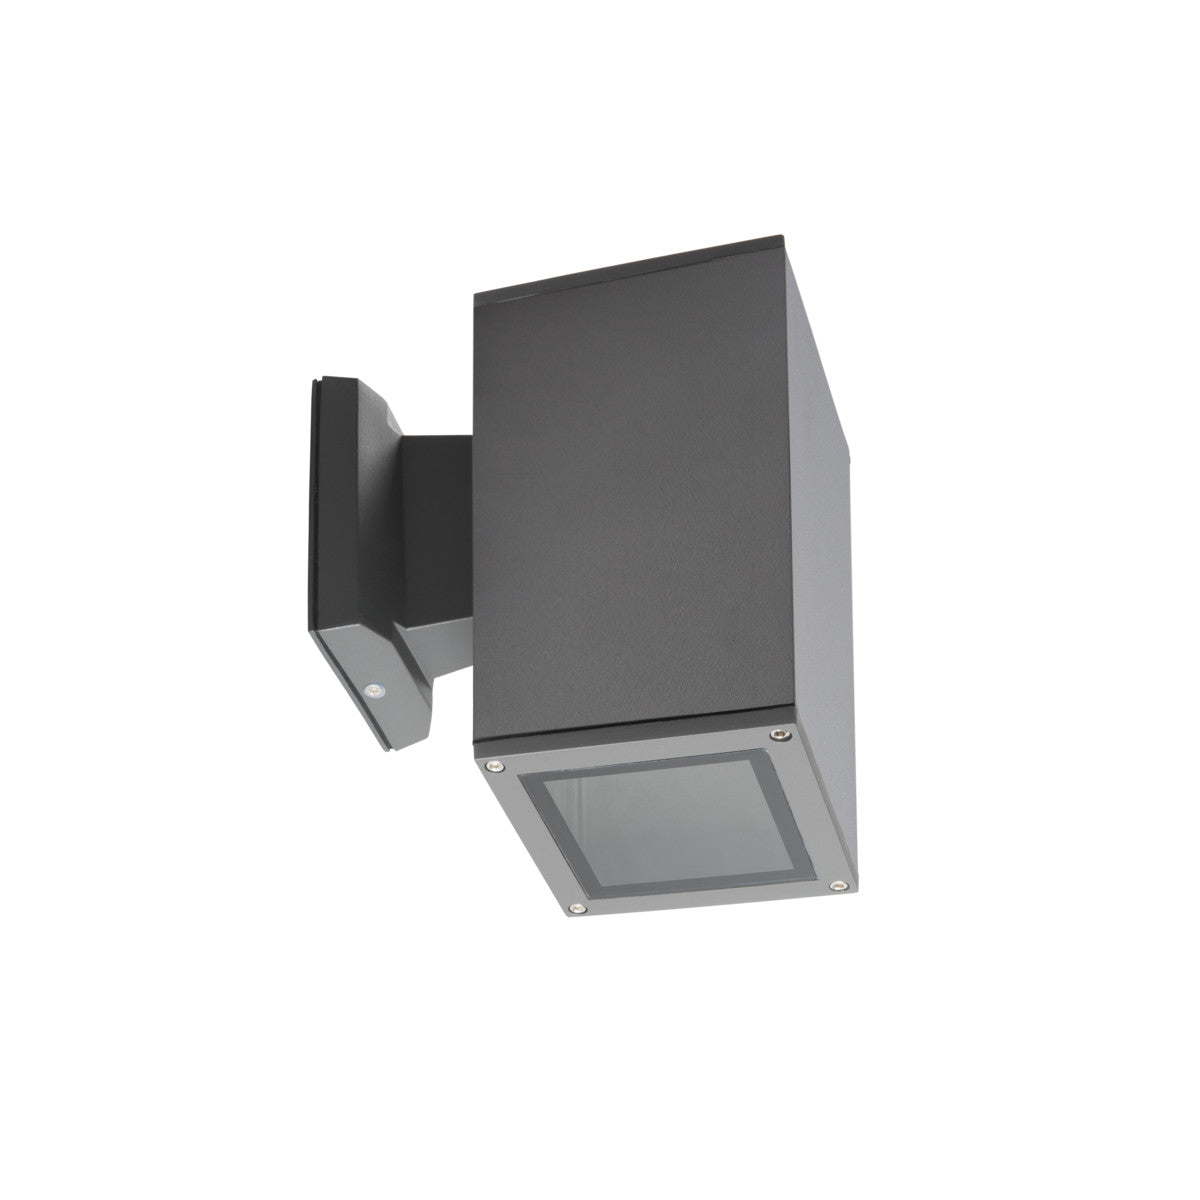 Kanlux LART E27 Up Down Wall Mounted IP54 Outdoor Light Fitting